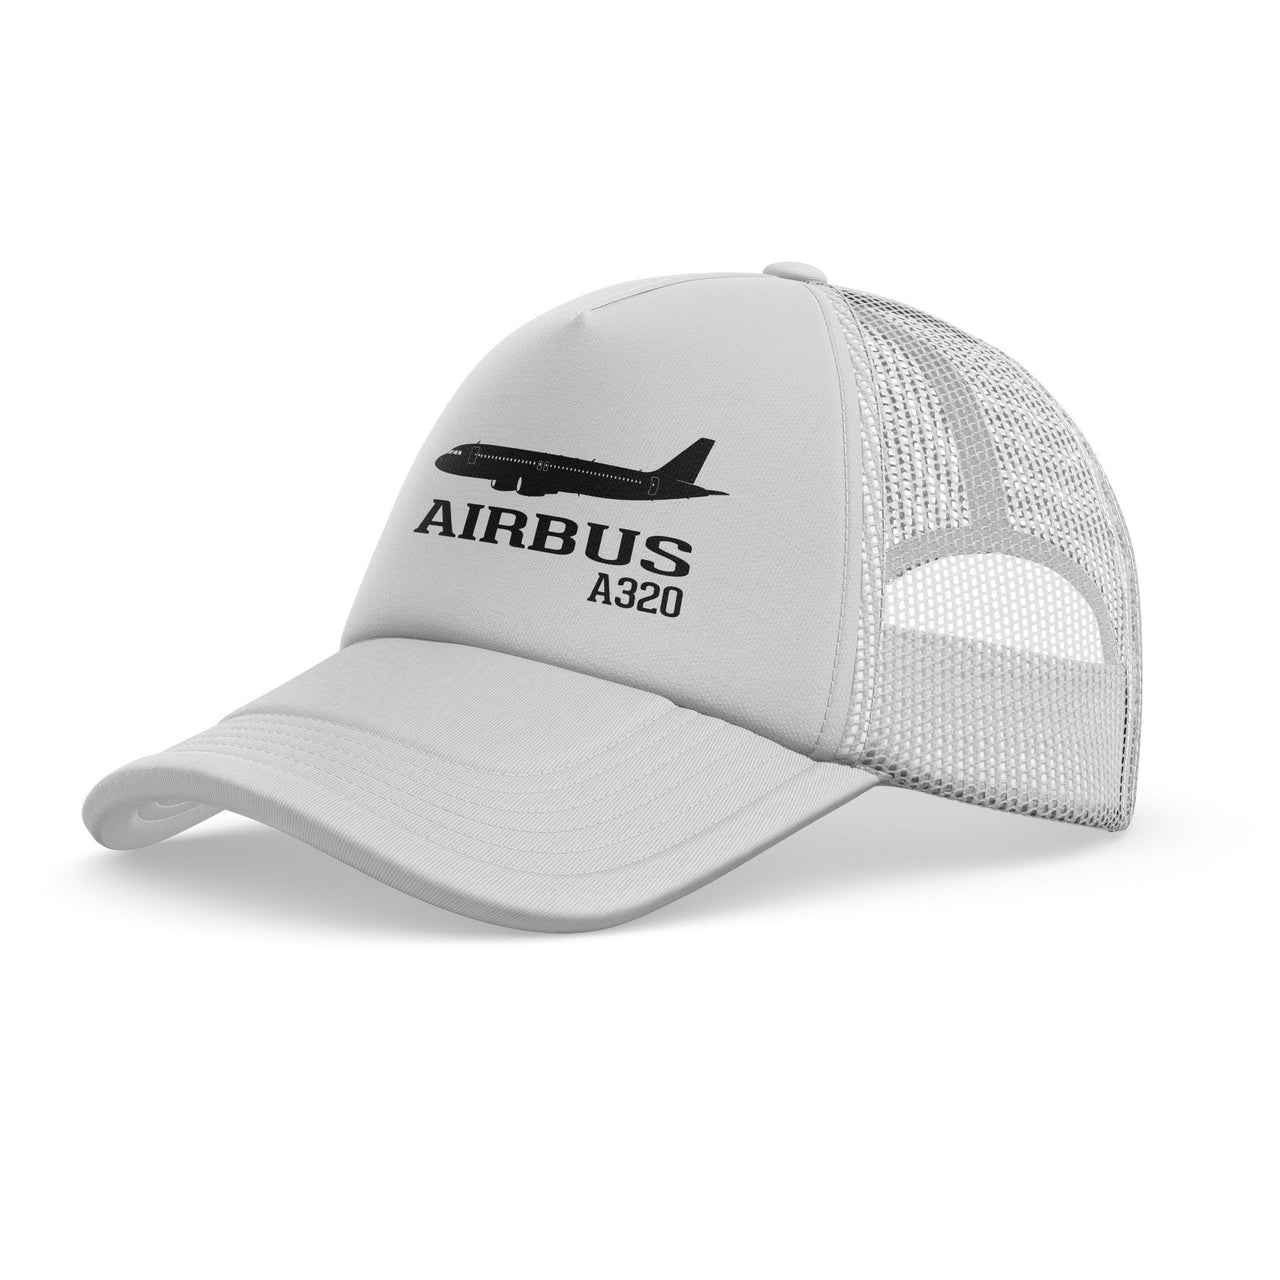 Airbus A320 Printed Designed Trucker Caps & Hats